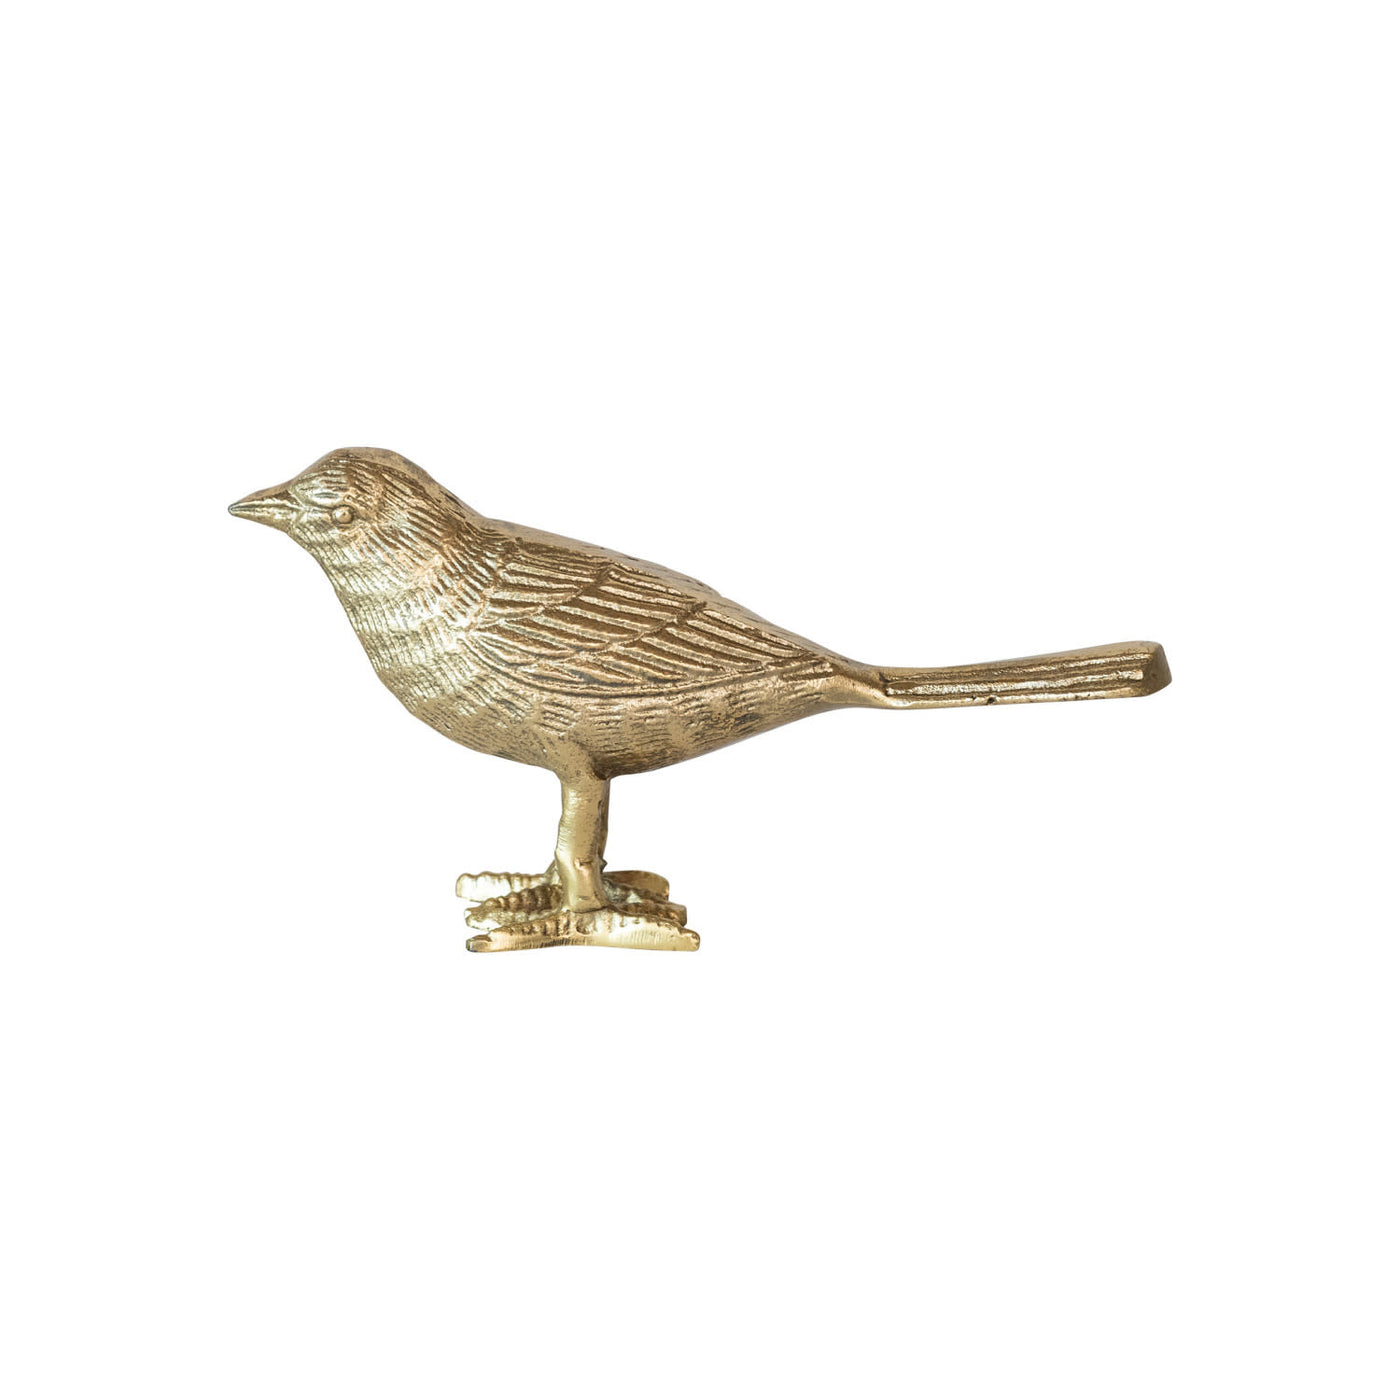 Gold Finish Cast Aluminum Bird Figurine available at Davis Porch and Patio Weatherford Texas